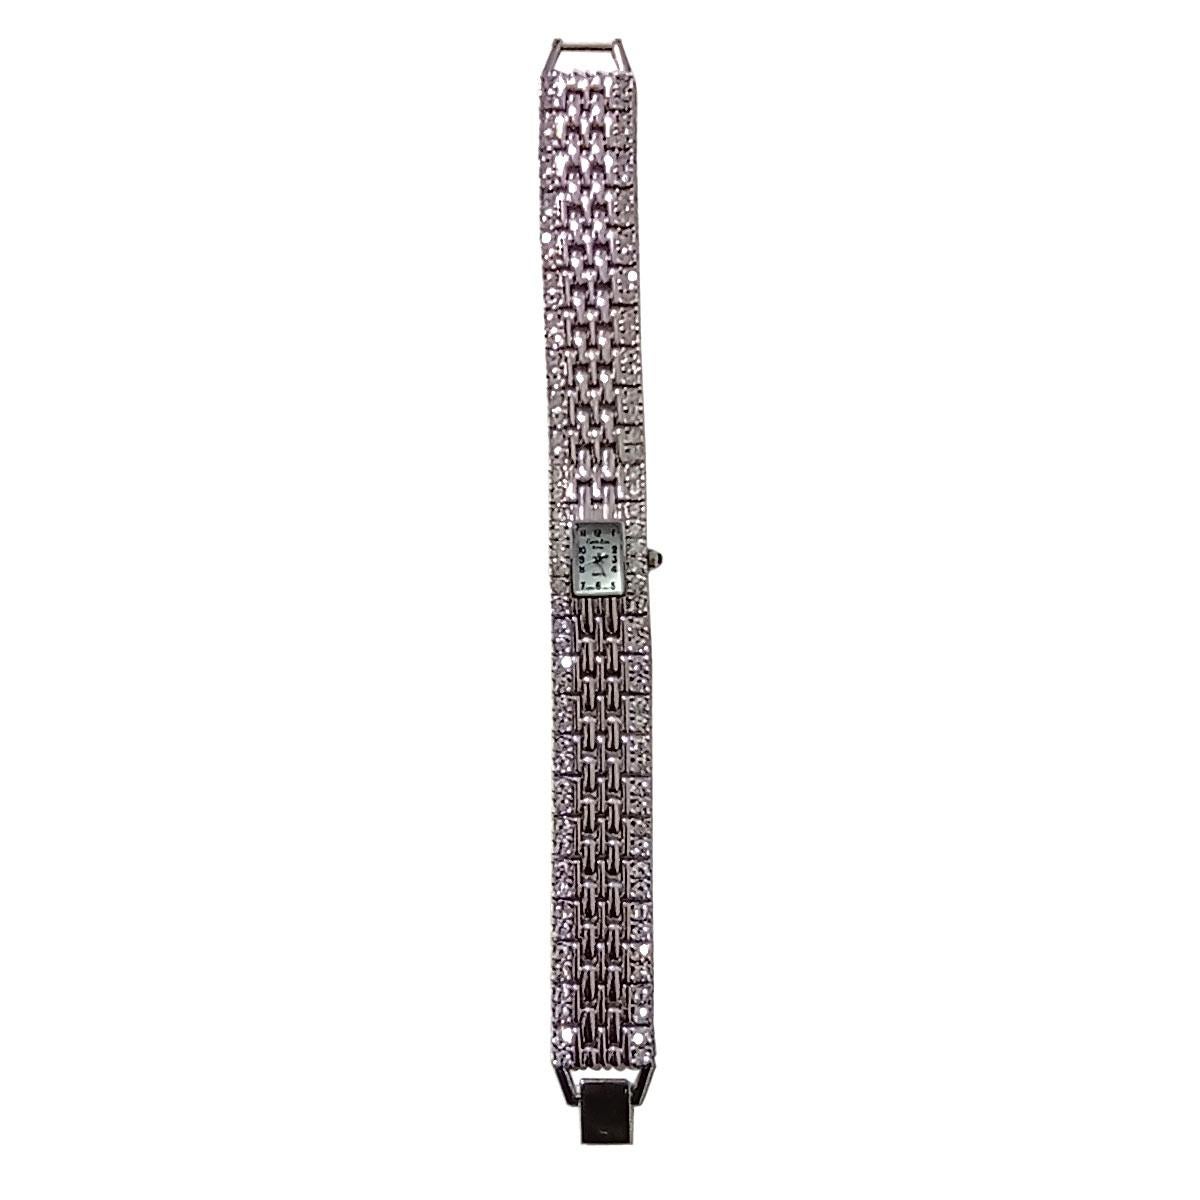 Amazing Carlo Zini Milano jewel watch 
One of the greatest bijoux creators of all times
Vintage from late 80's / early 90's
Perfectly working
Japanese quartz movement
Rhodium metal strap
Swarovski crystals
Non allergenic
Wrist measurement 19 cm